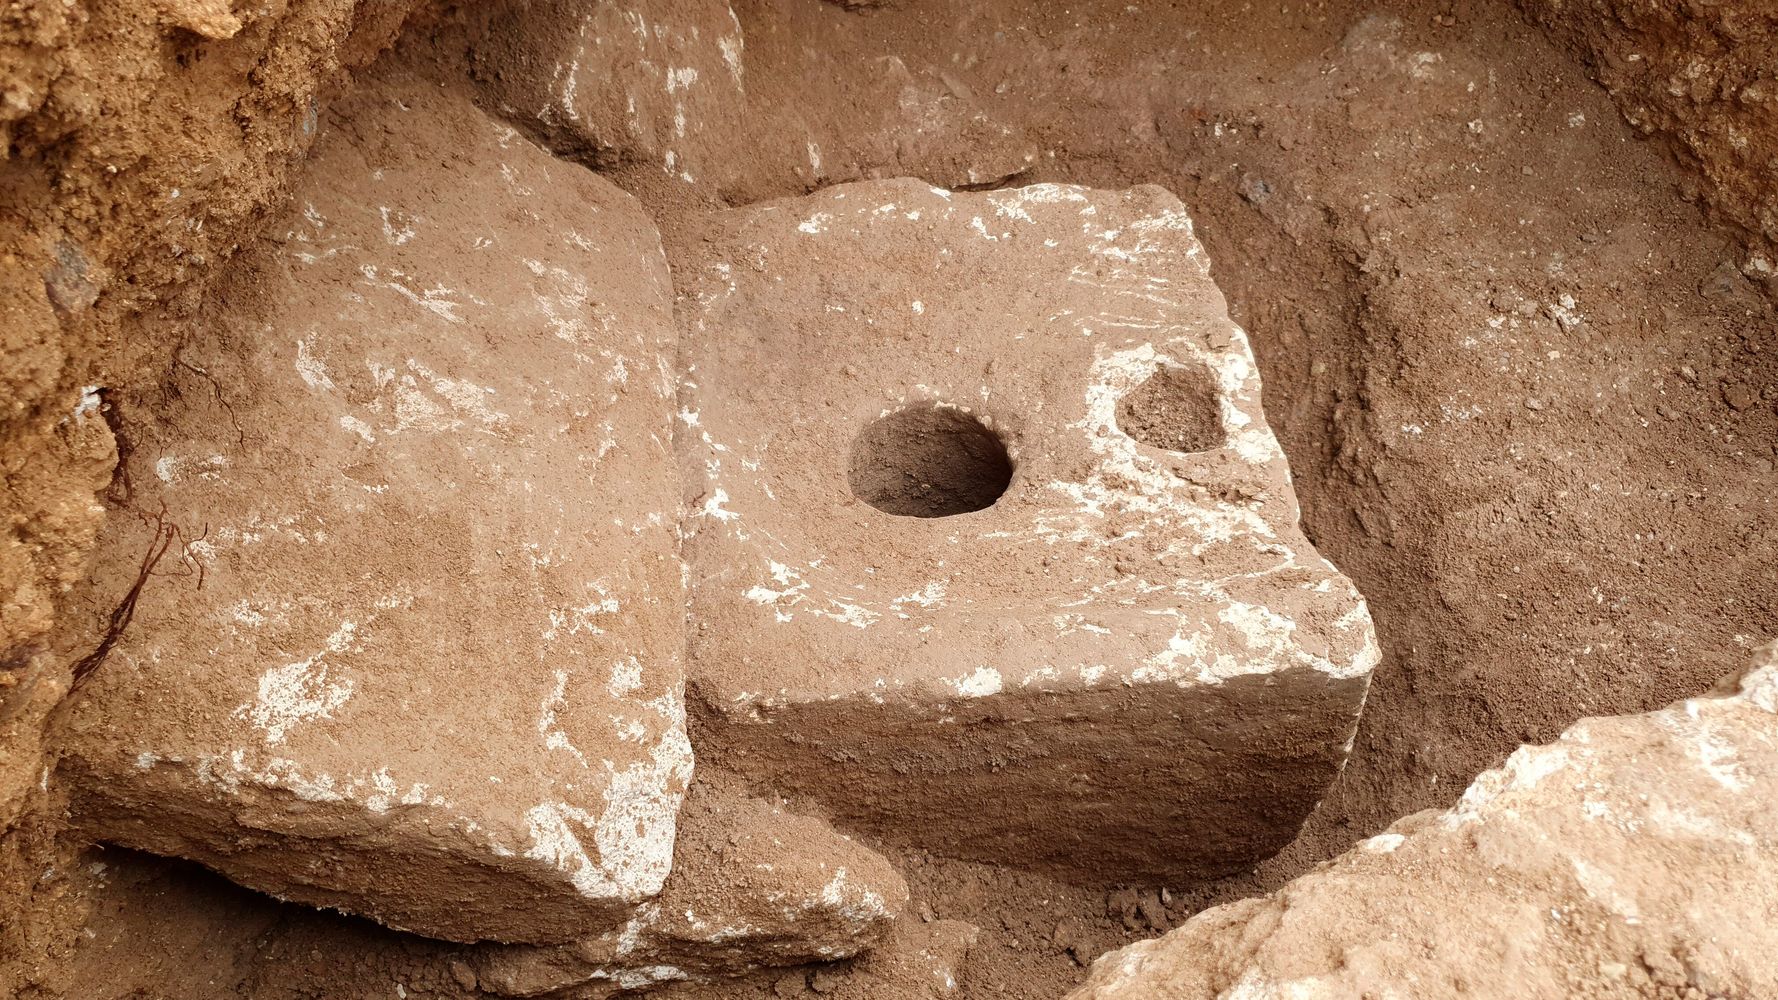 2,700-Year-Old Toilet Found In Jerusalem Was A Rare Luxury